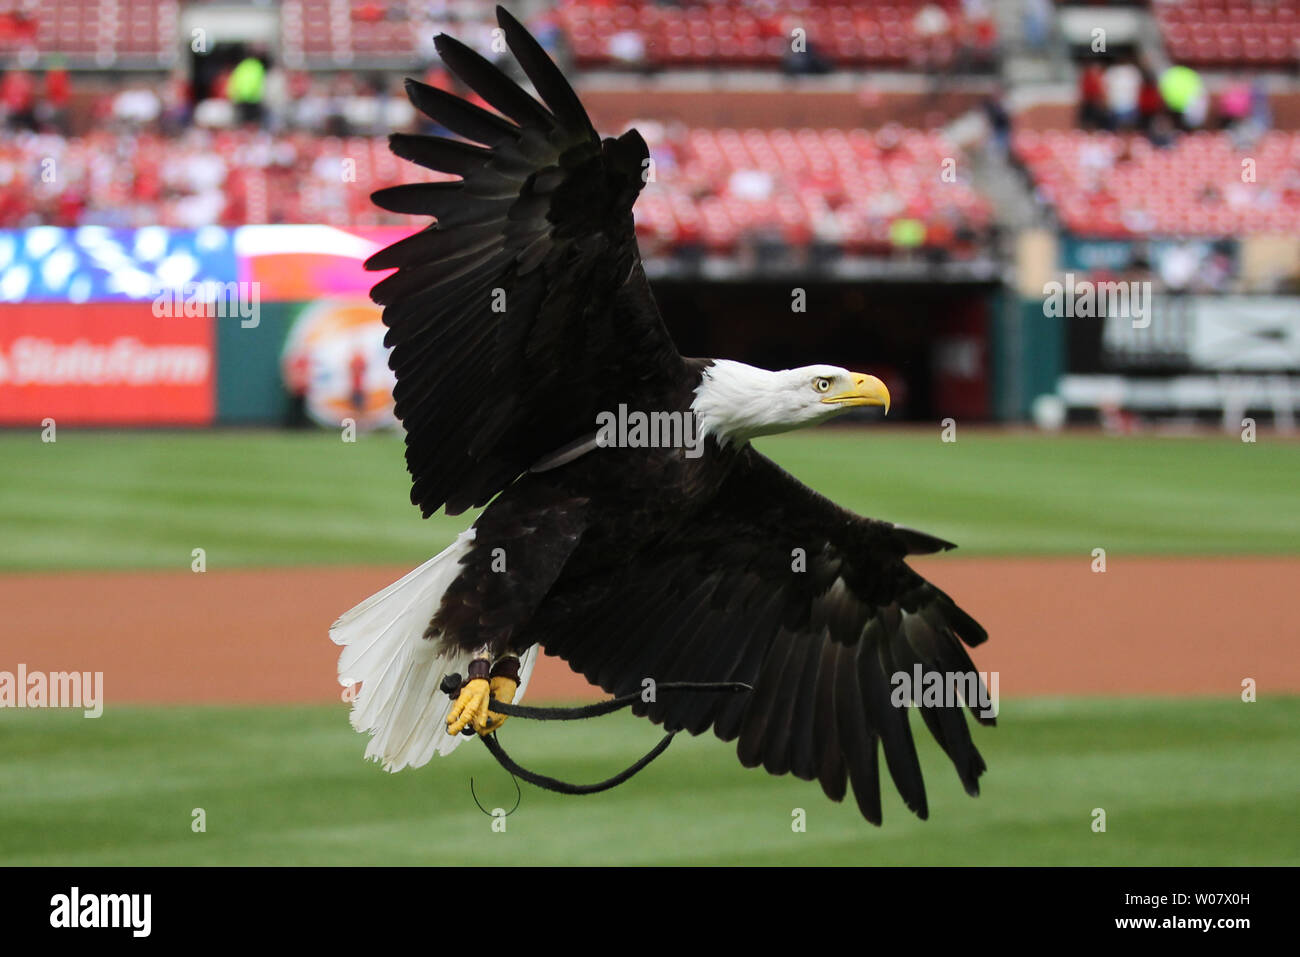 Clark the bald eagle from the World Bird Santuary, comes in for a landing  before the Pittsburgh Pirates -St. Louis Cardinals baseball game at Busch  Stadium in St. Louis on October 1